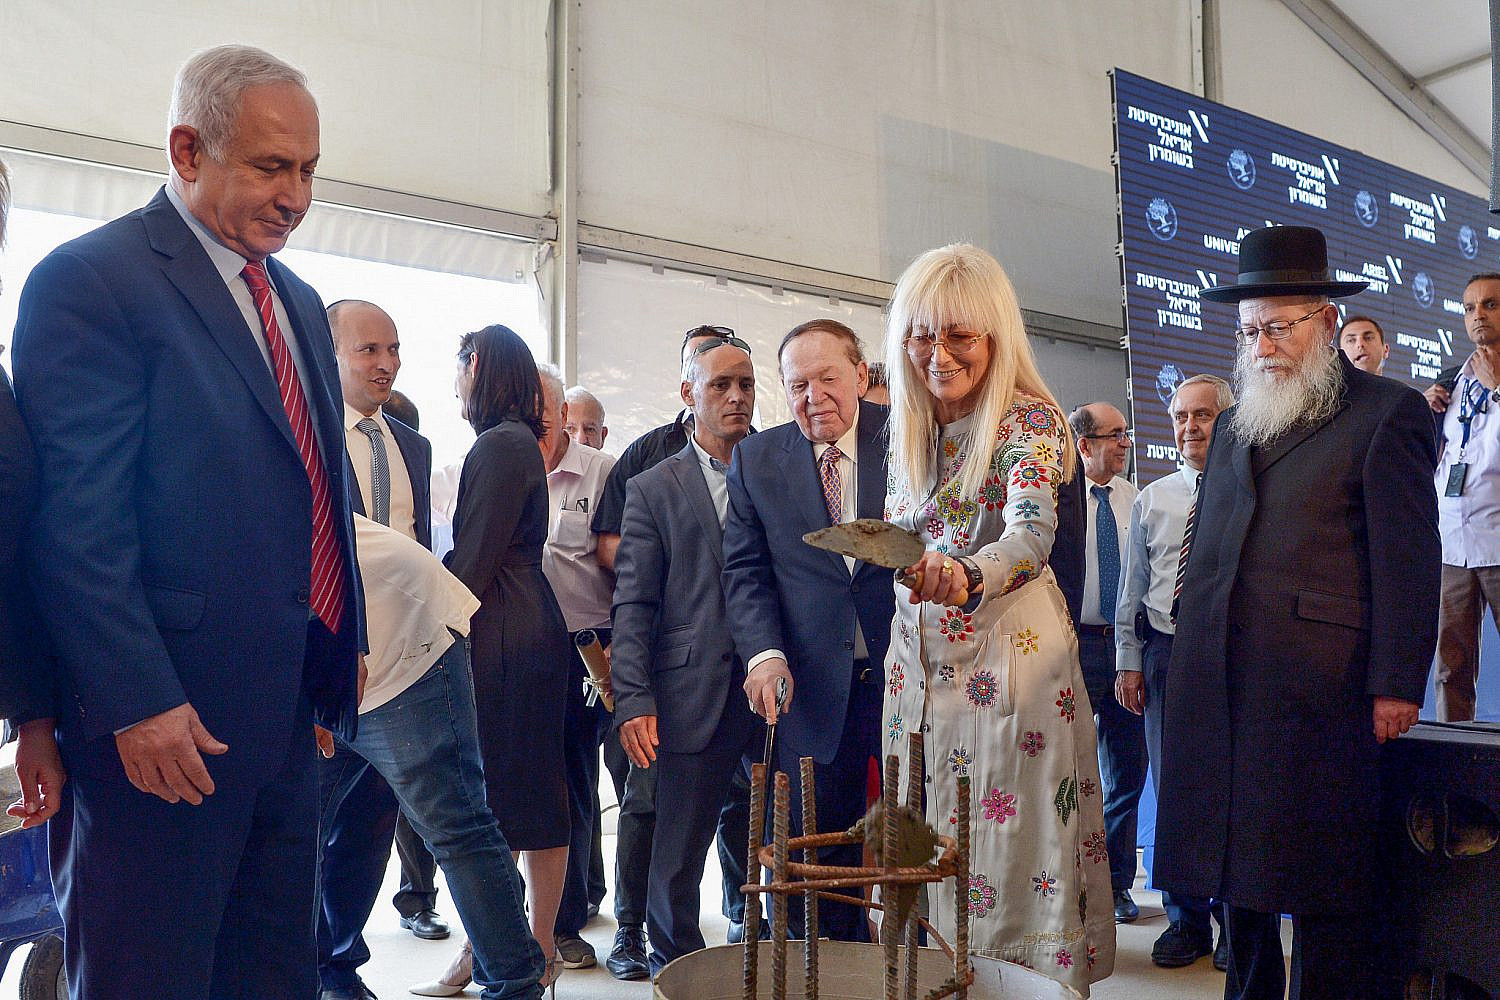 American businessman and investor Sheldon Adelson with Miriam Adelson at the ceremony of a laying of a cornerstone for new Medicine Faculty buildings at the Ariel University in the West Bank, June 28, 2017. (Ben Dori/Flash90)